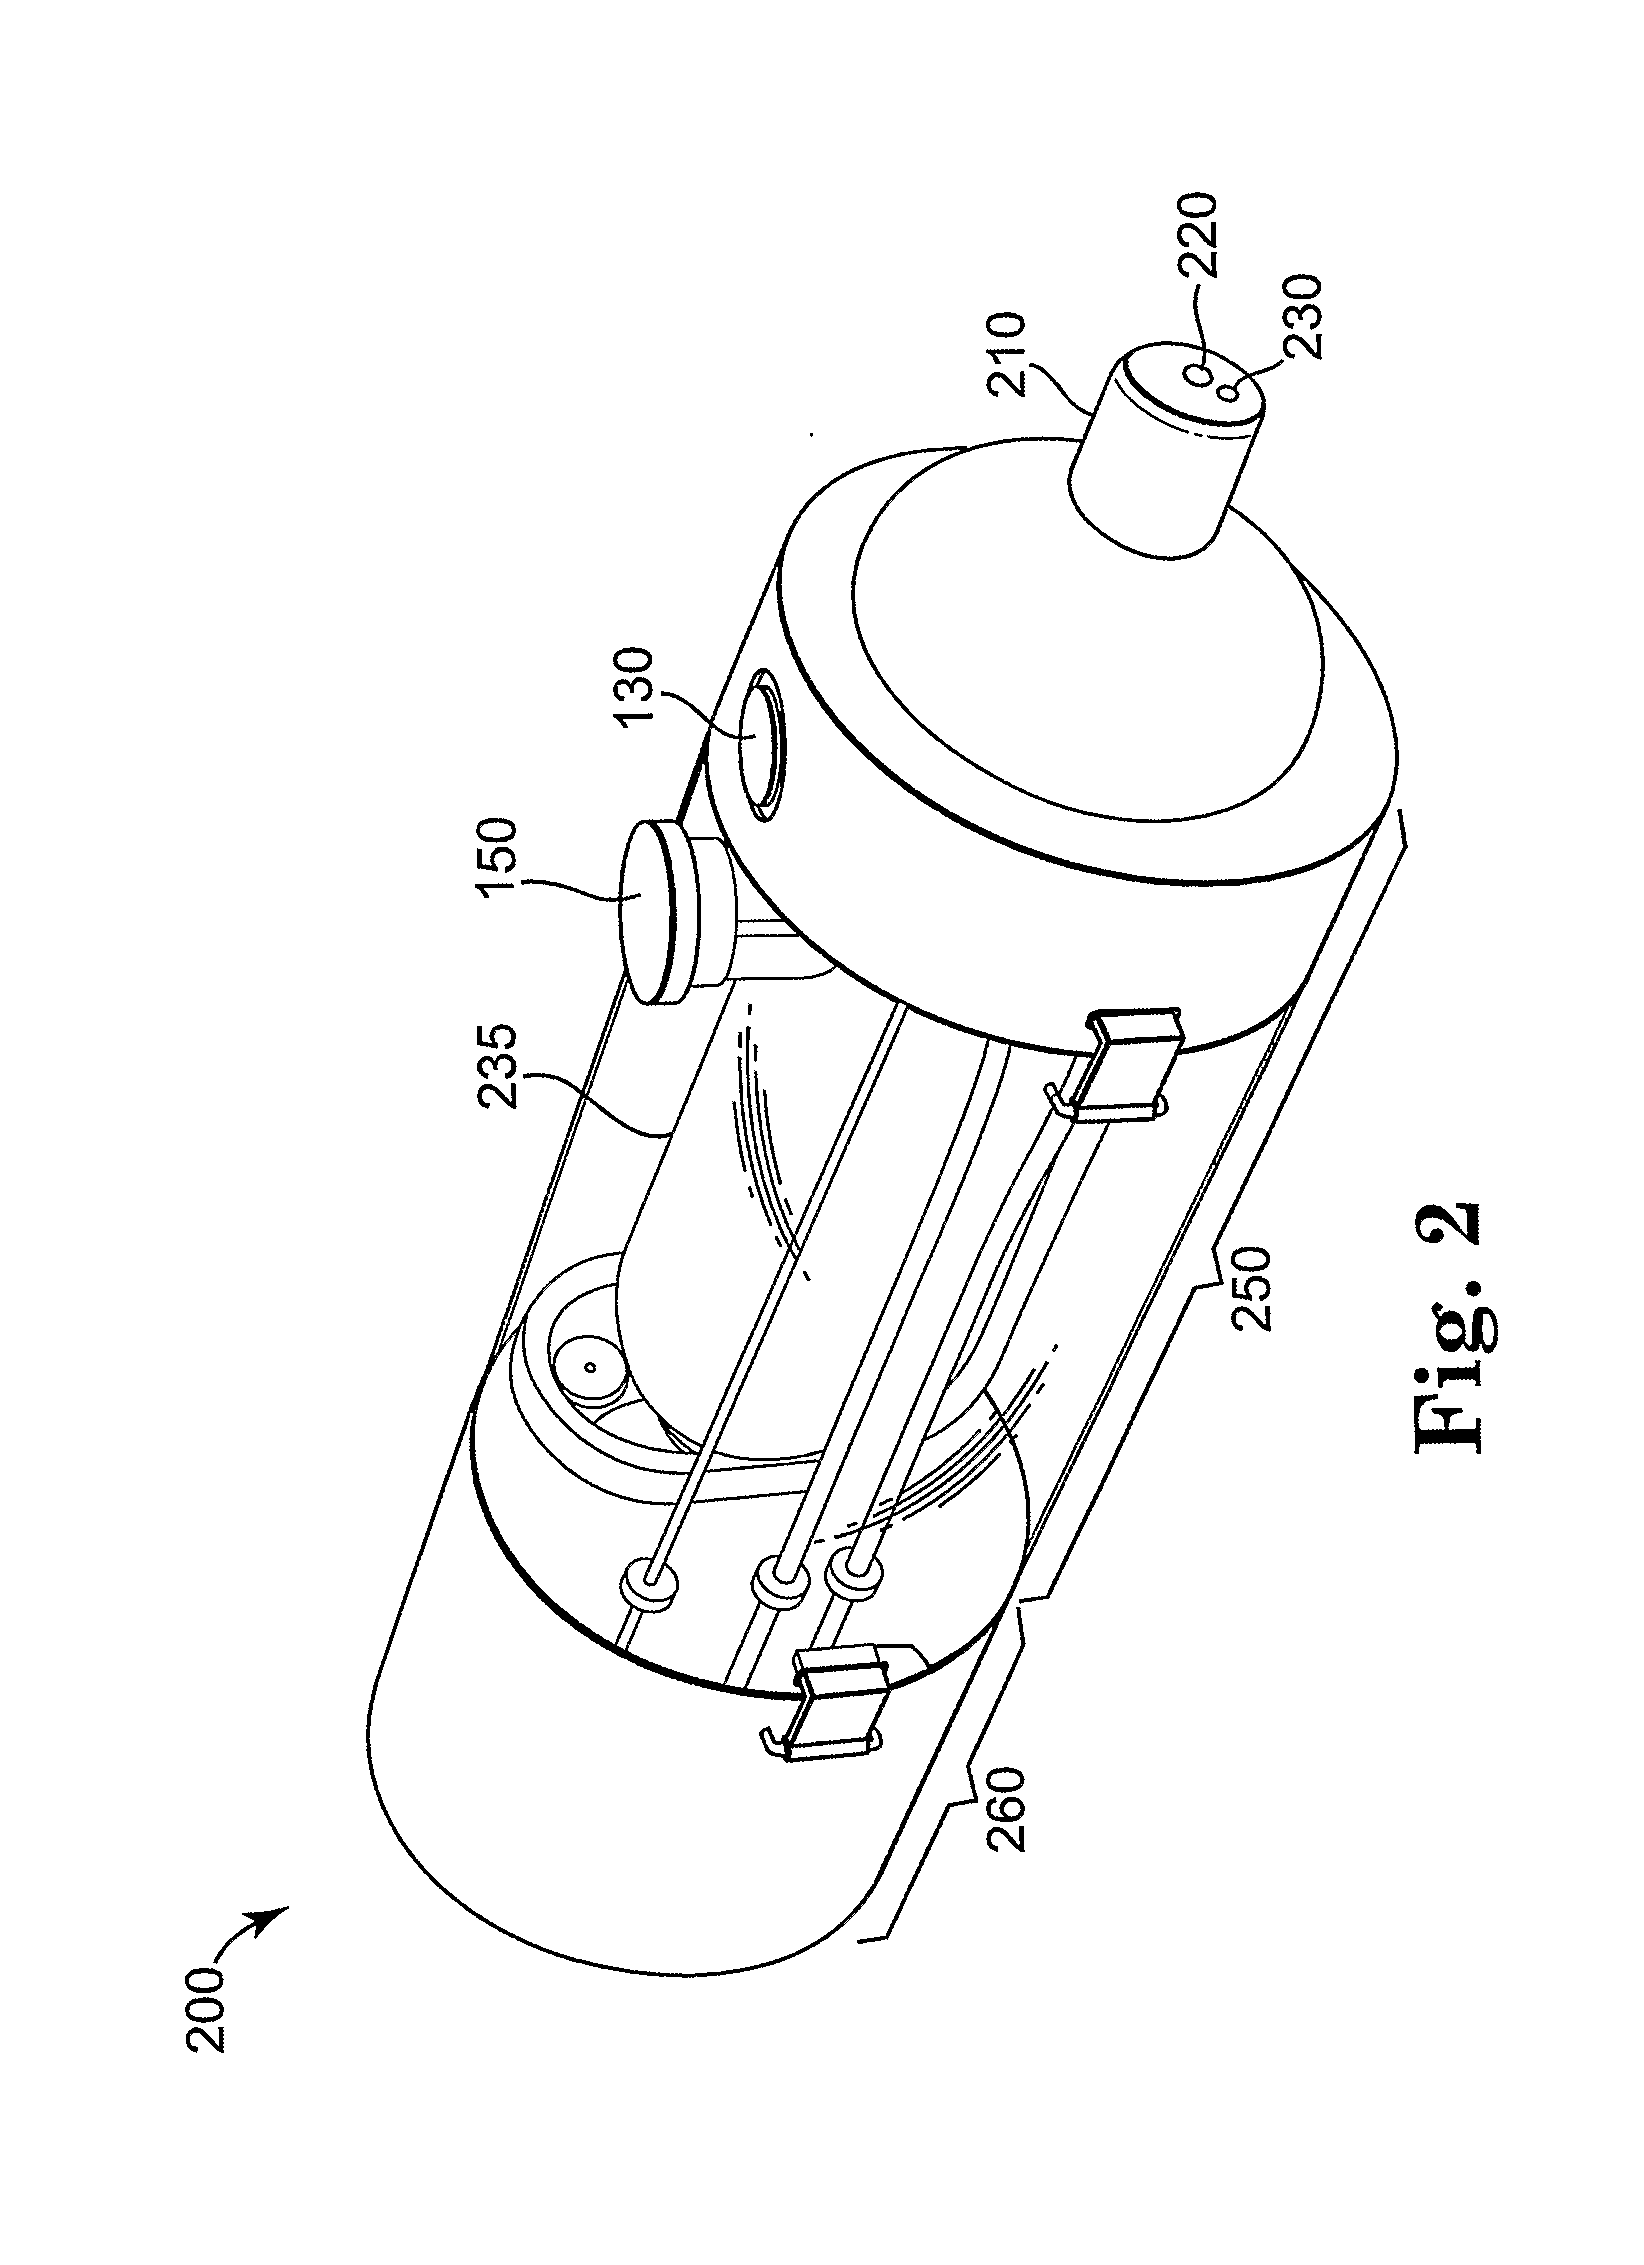 Computer Controlled Bottle for Oral Feeding of a Patient